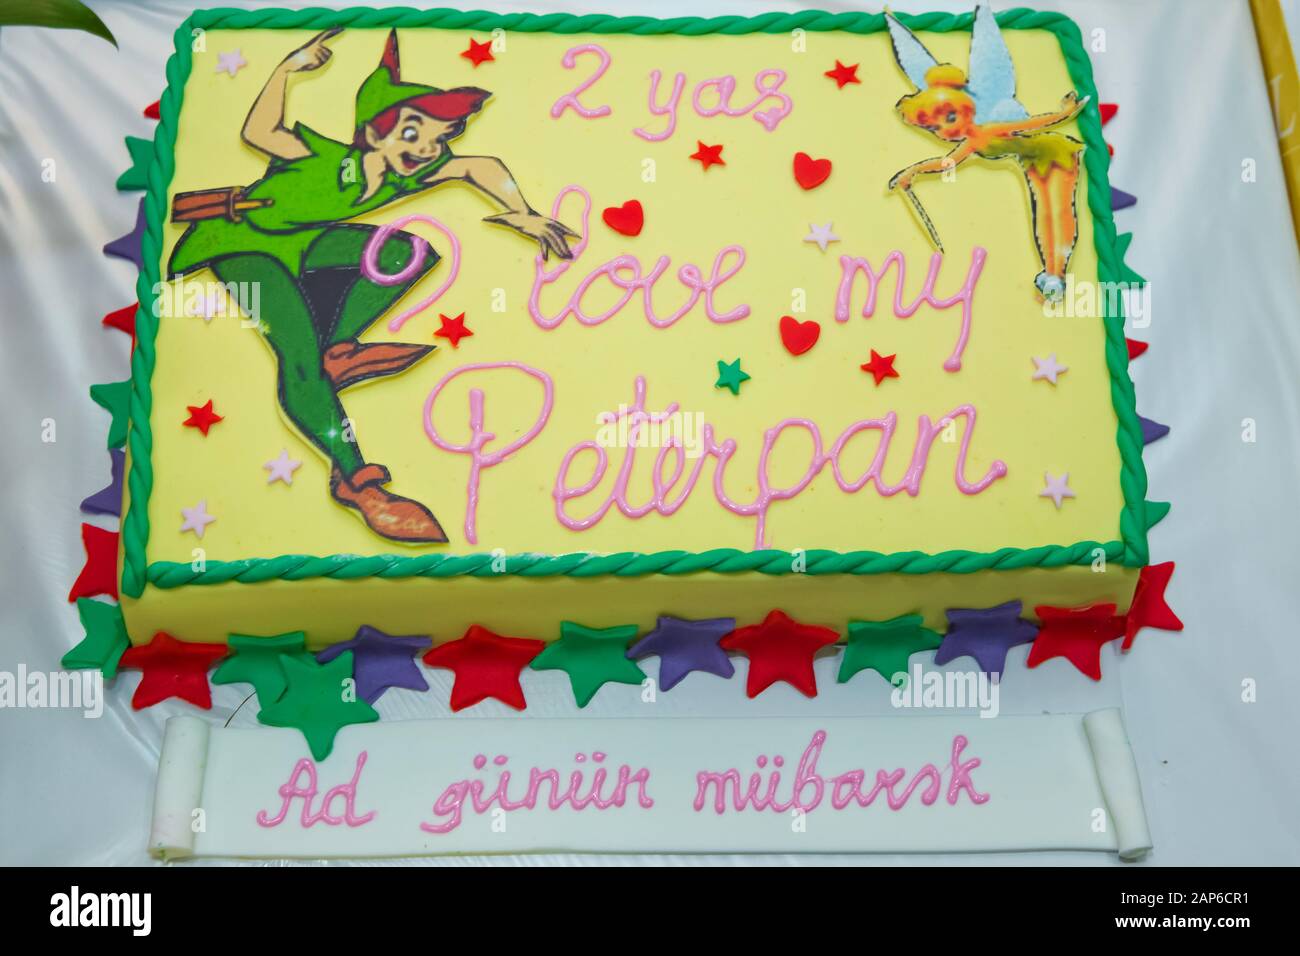 The little boy LOVED it Peter Pan Cake . My version of Peter Pan